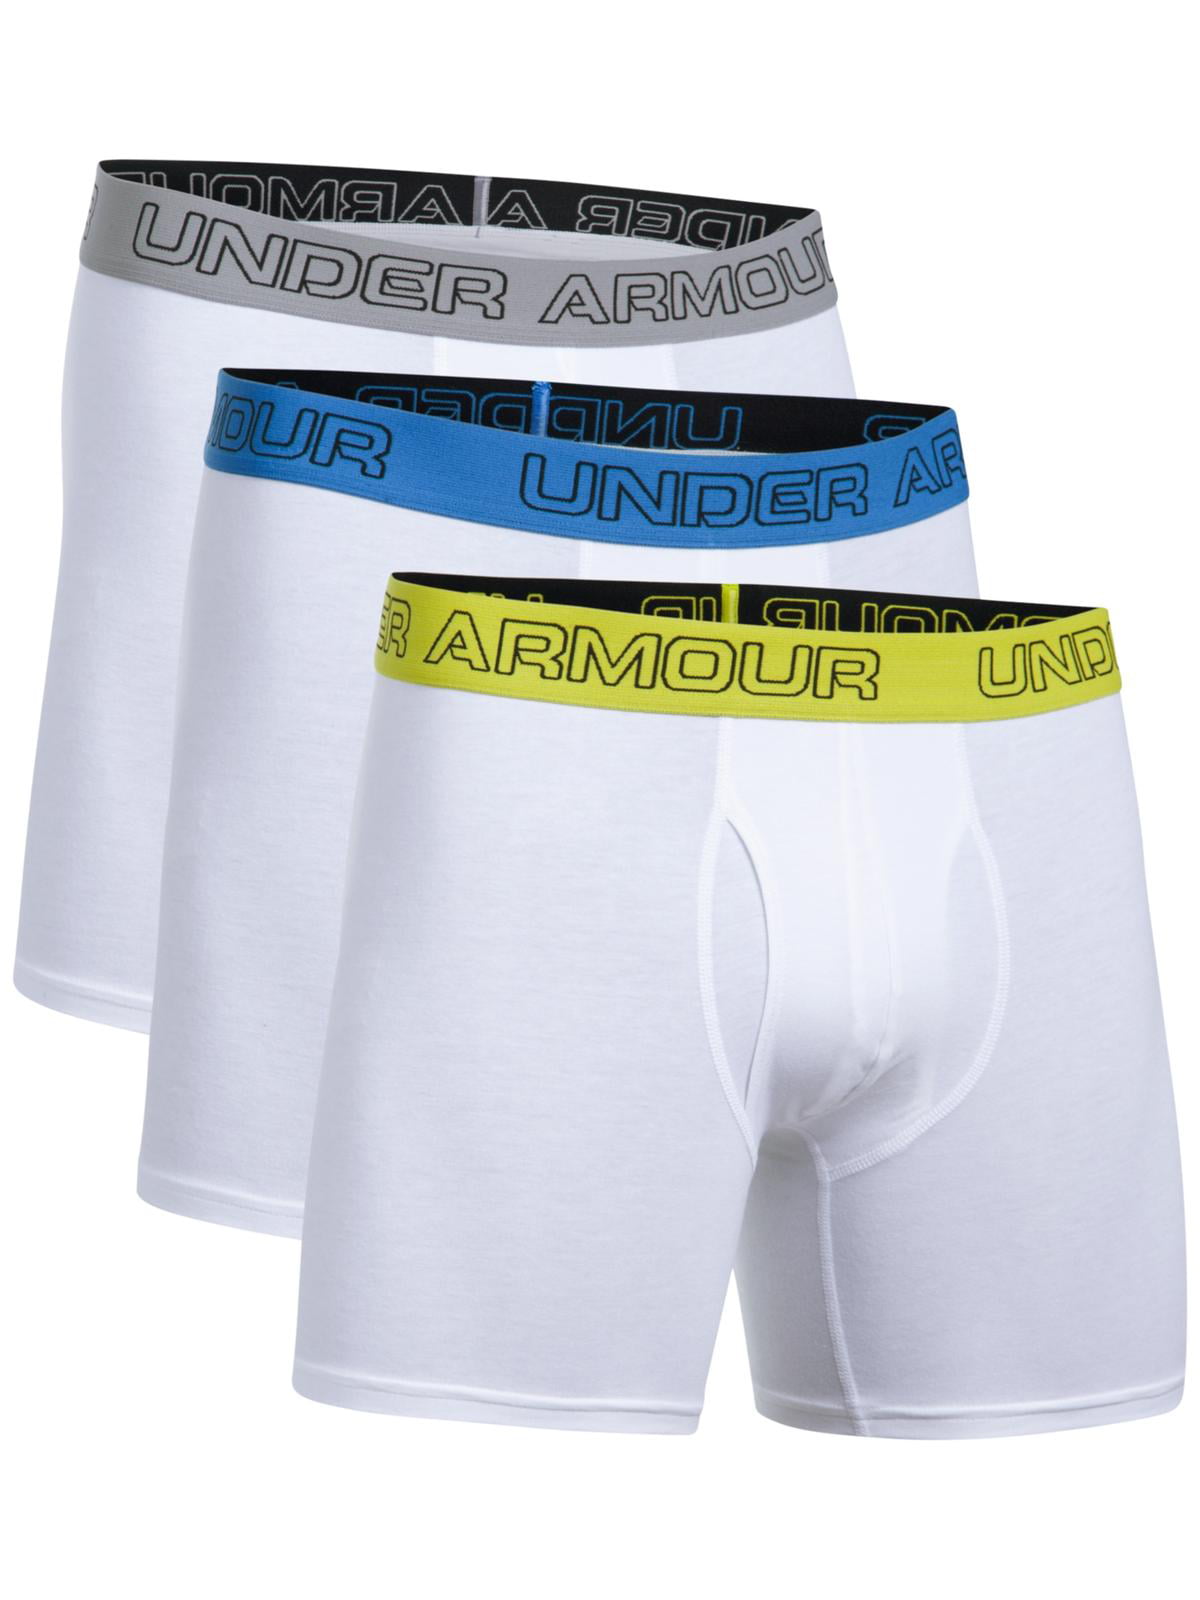 Under Armor mens quick-drying boxers 